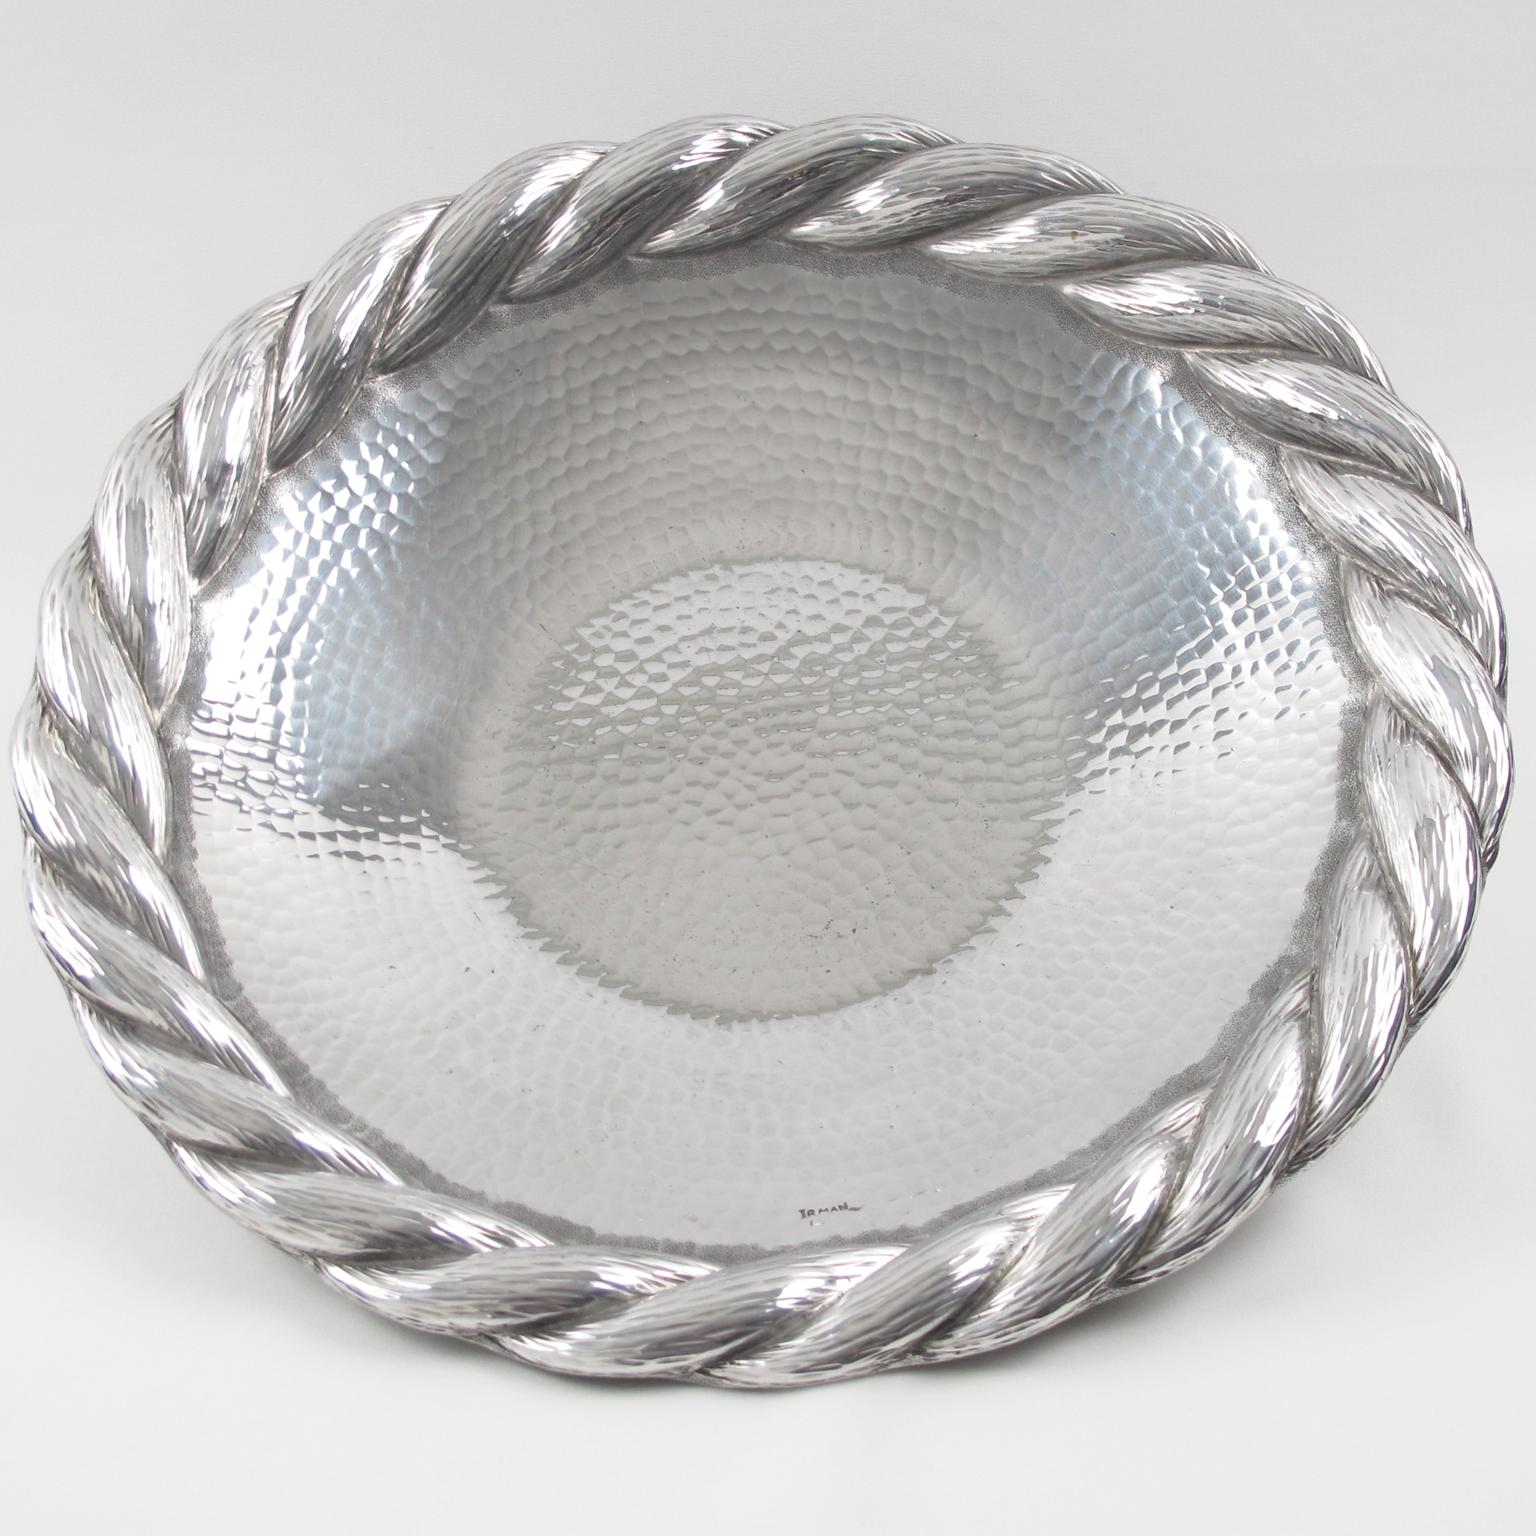 French Art Deco Aluminum Platter Centerpiece or Tray by Irman France, 1930s For Sale